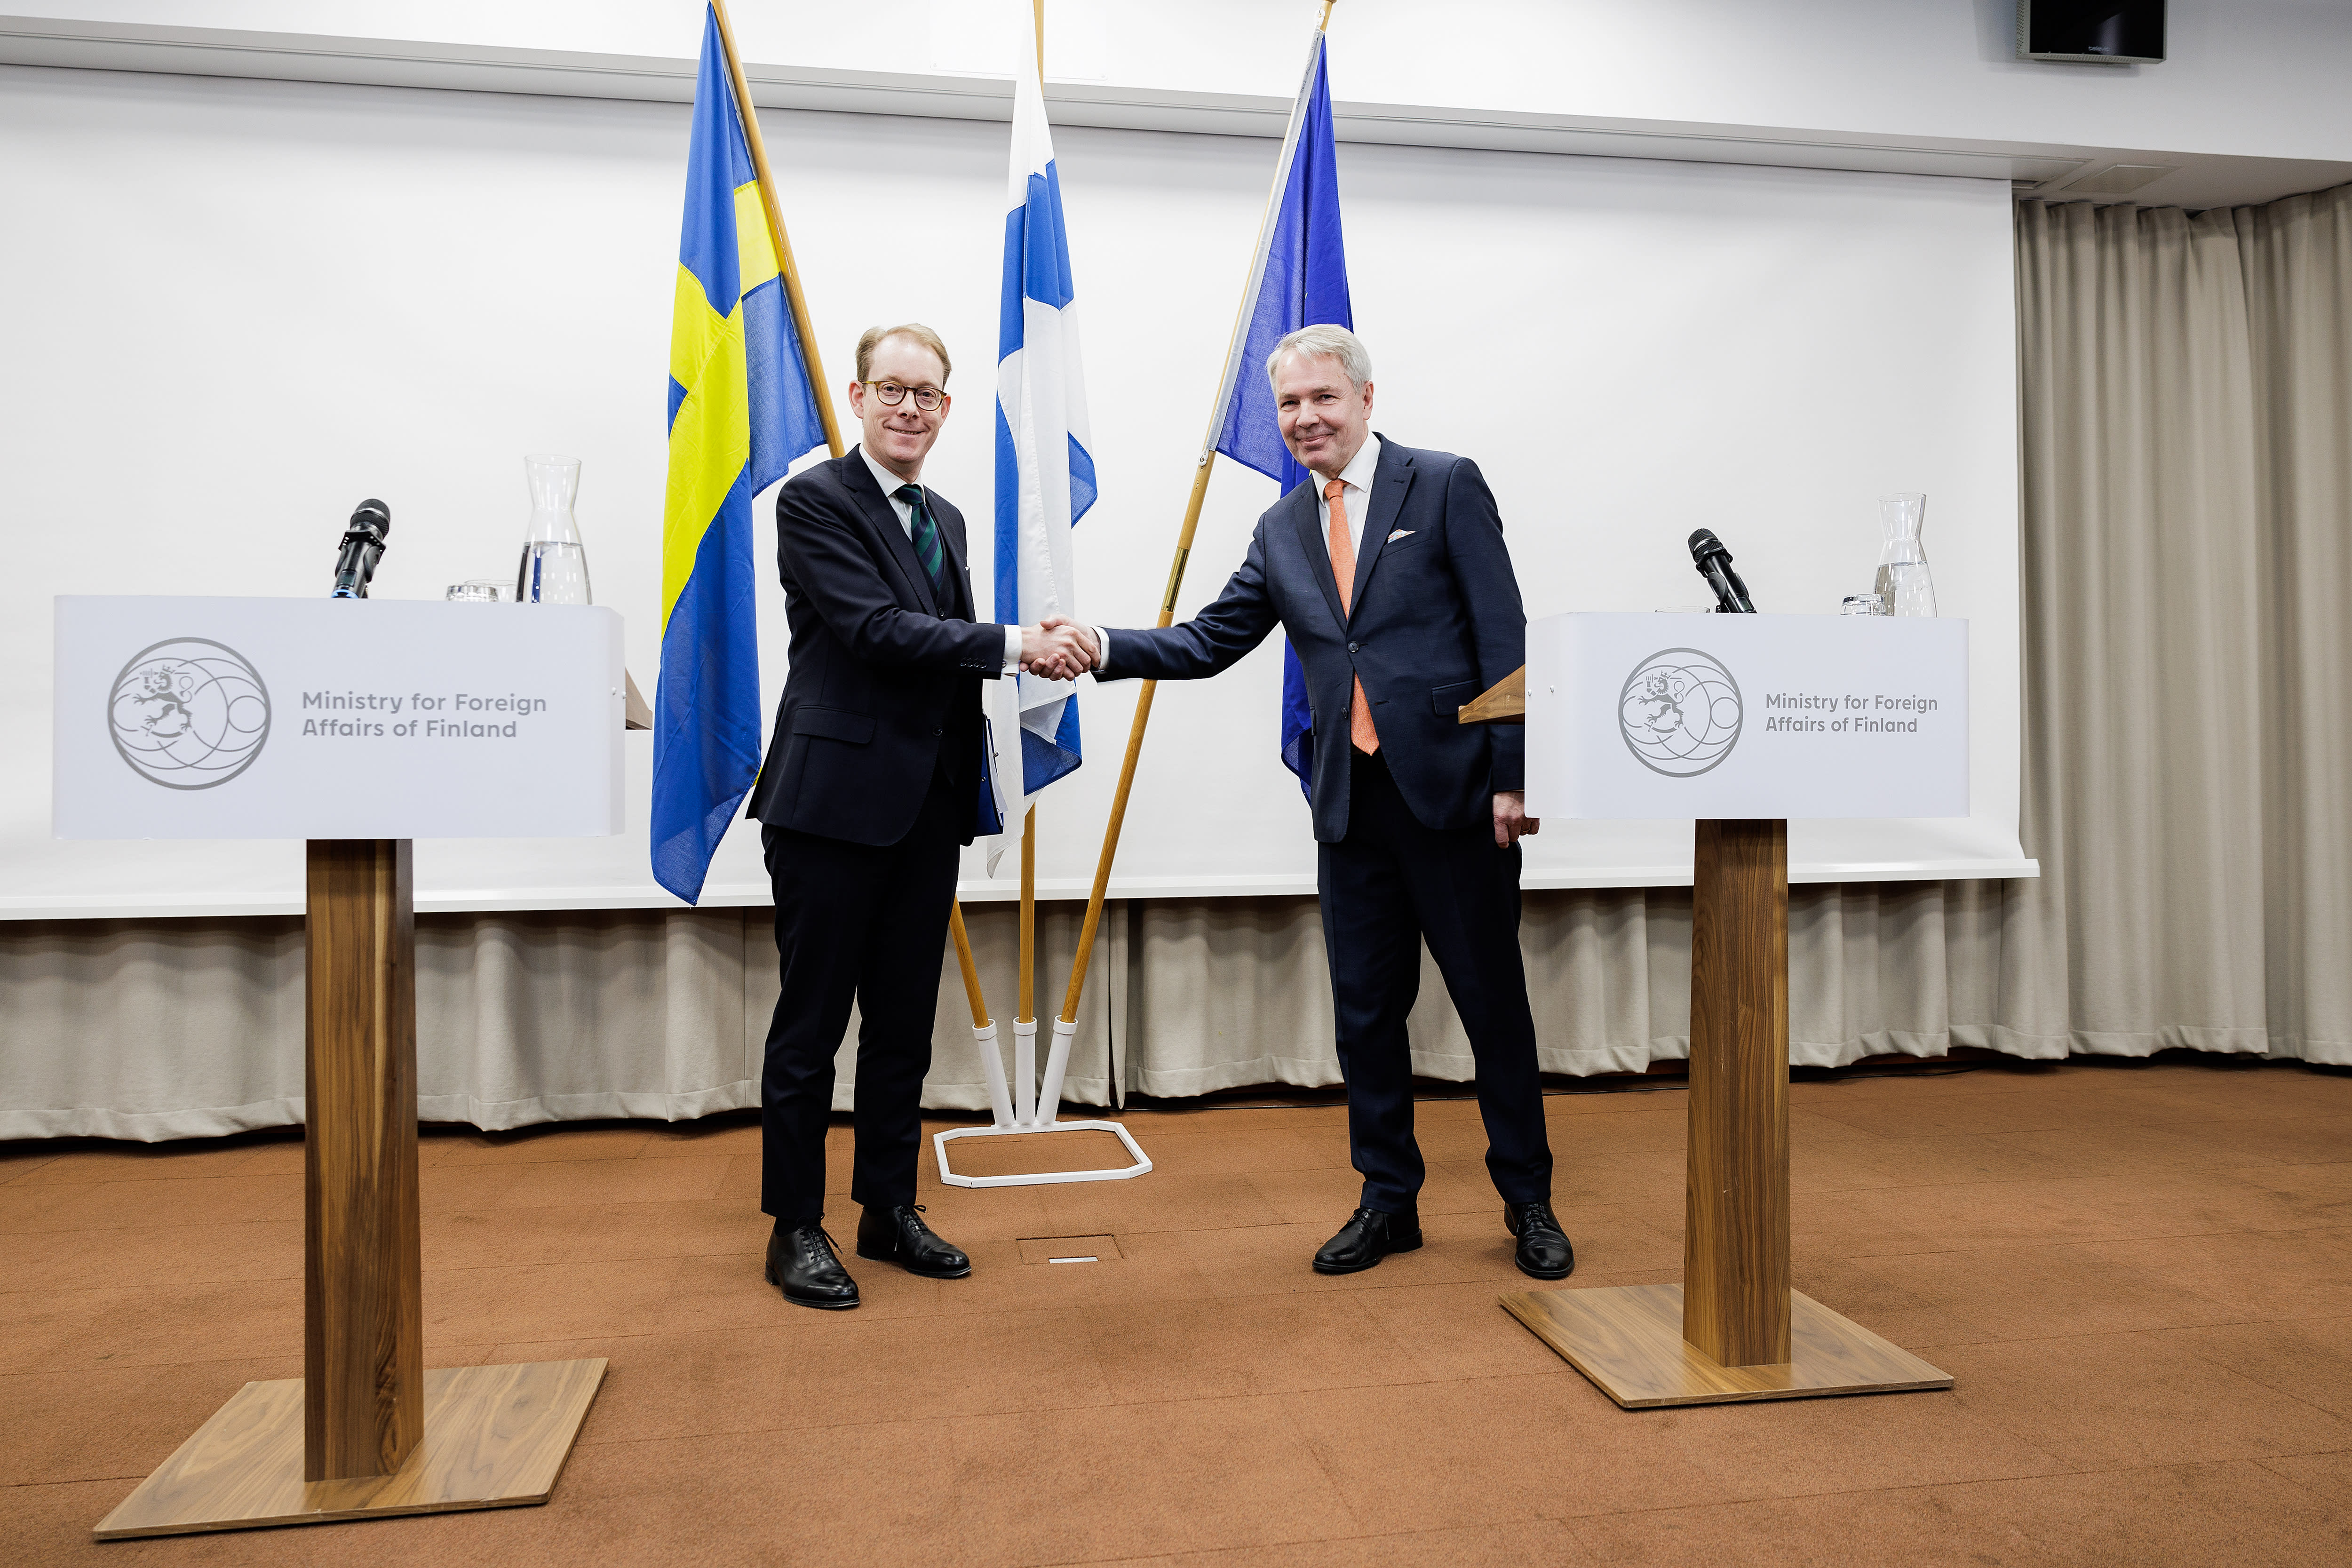 Haavisto: There is talk of Sweden leaving to join NATO "speculative"